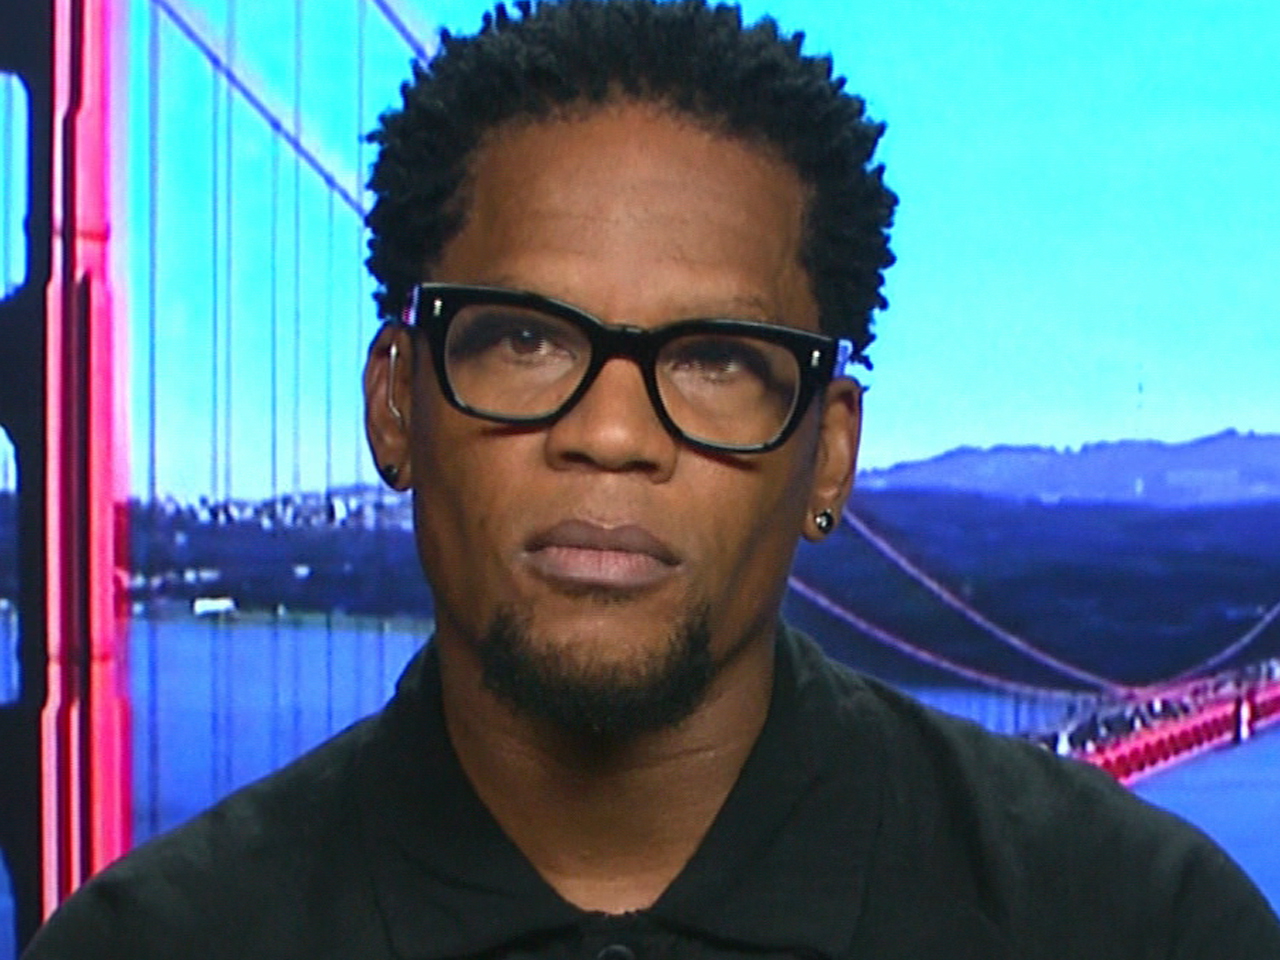 Dl Hughley Takes On Politics Empty Vessel Romney And Chick Fil A - 